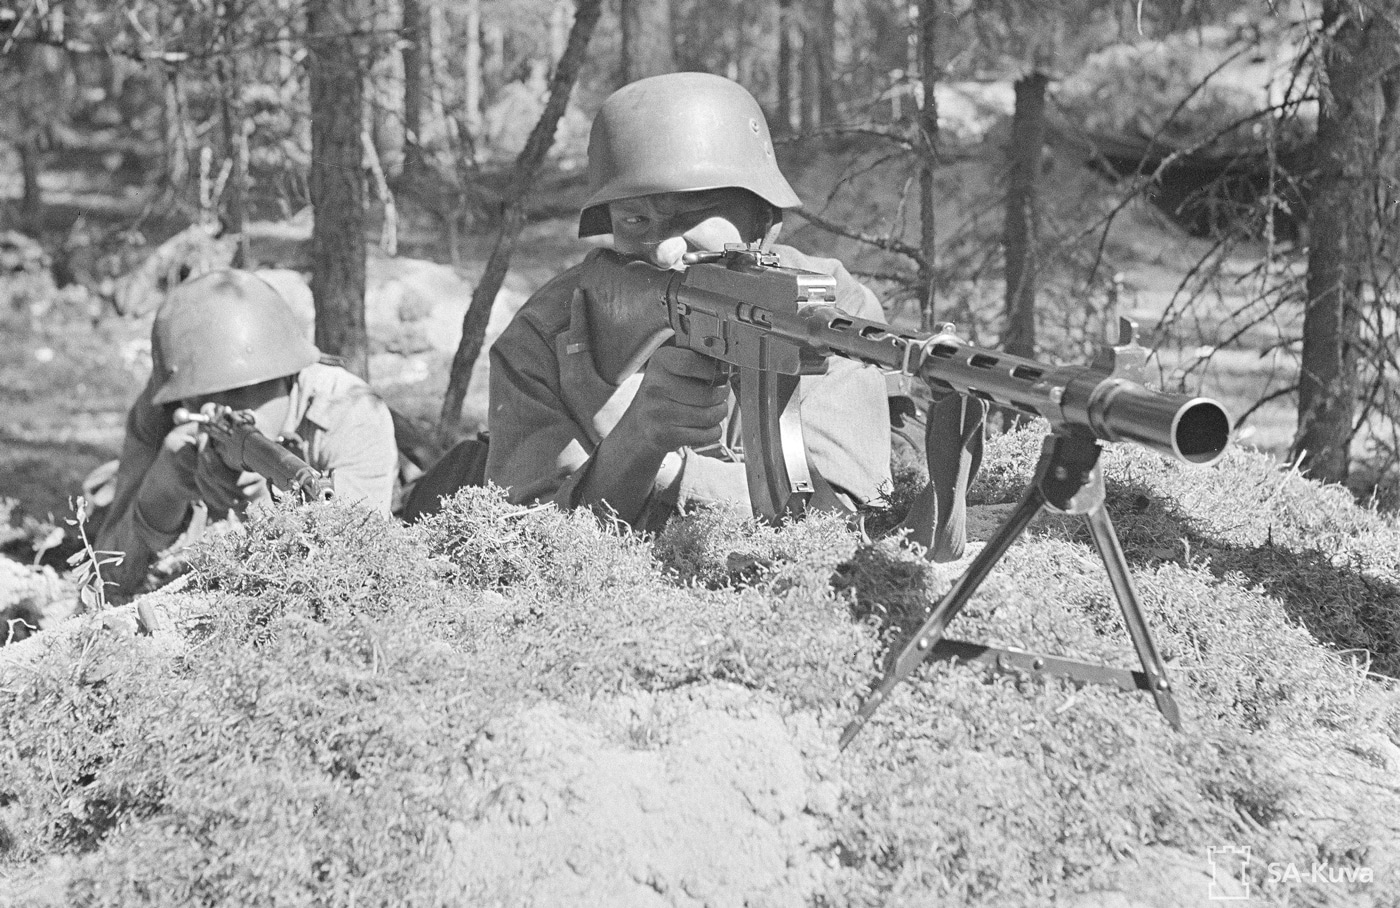 In this photo, we see two Finnish soldiers in defensive positions during the Continuation War circa 1942. One is armed with the Lahti-Saloranta M/26. 	The Lahti-Saloranta M/26 is a light machine gun which was designed by Aimo Lahti and Arvo Saloranta in 1926. The weapon was able to fire in both full automatic and semi-automatic modes.